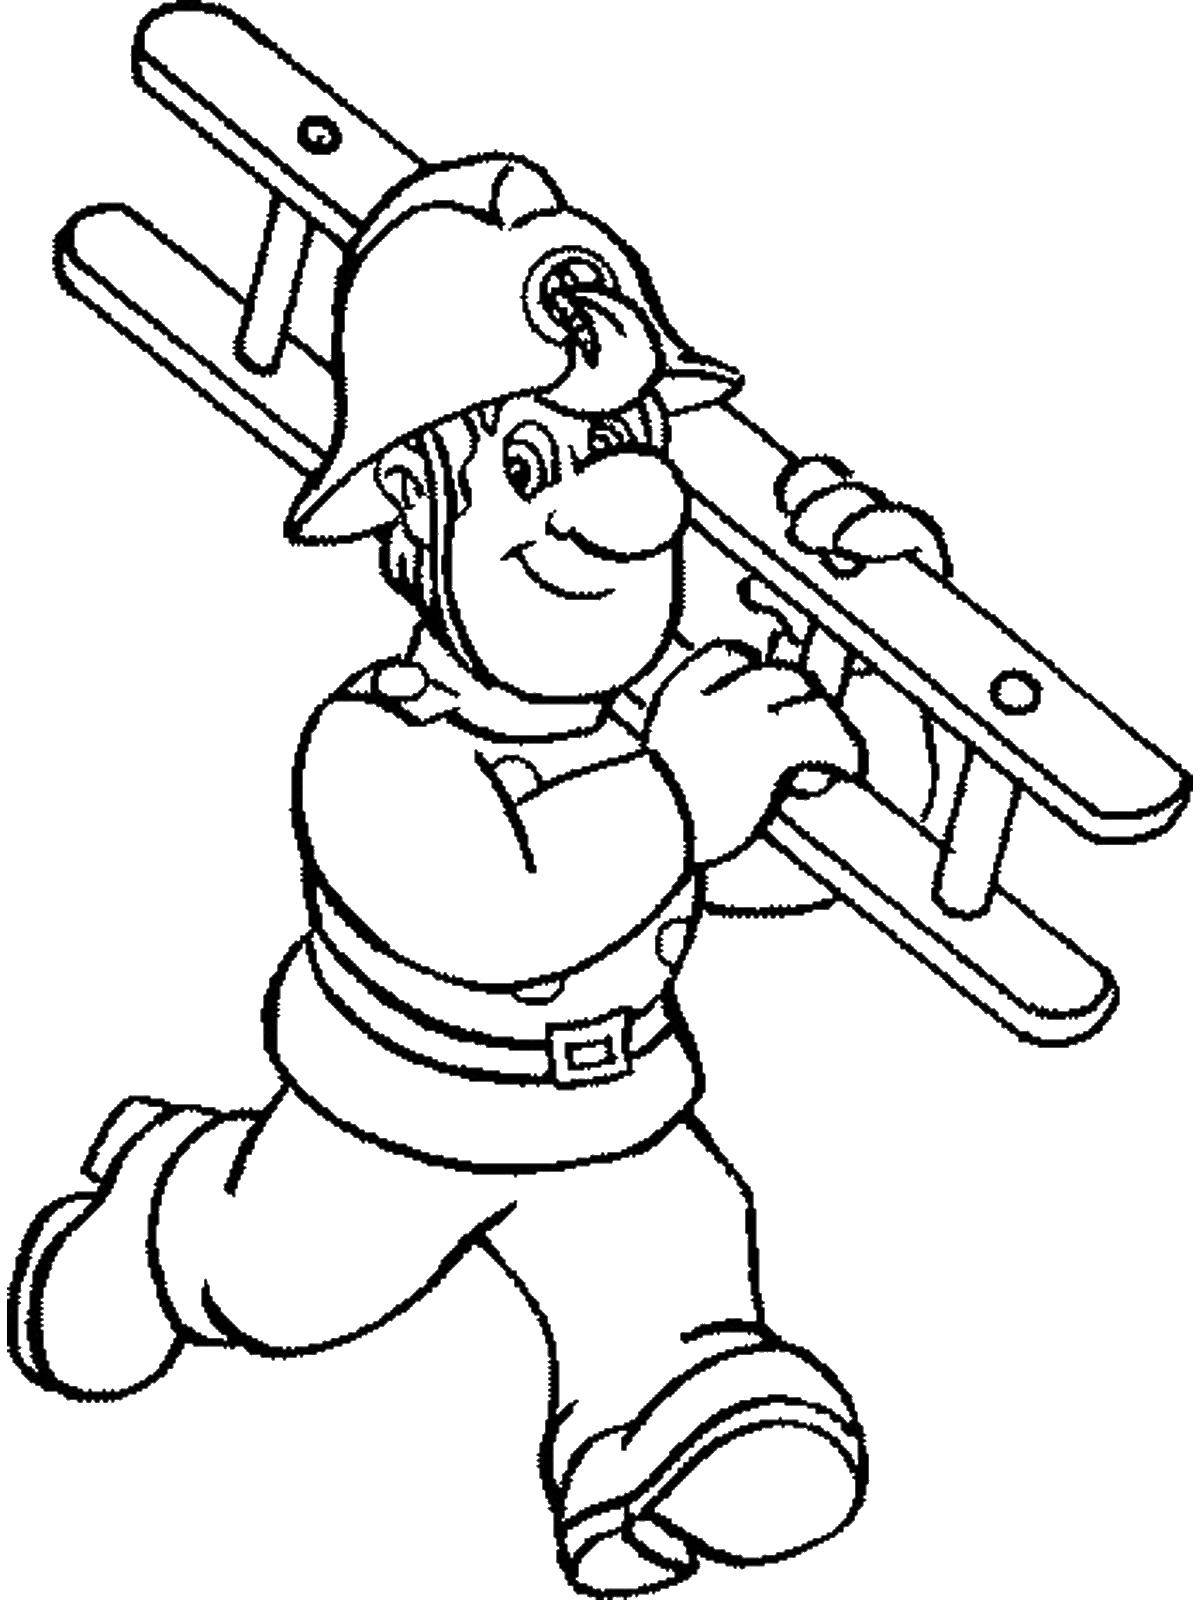 Colouring Pages: Ladder